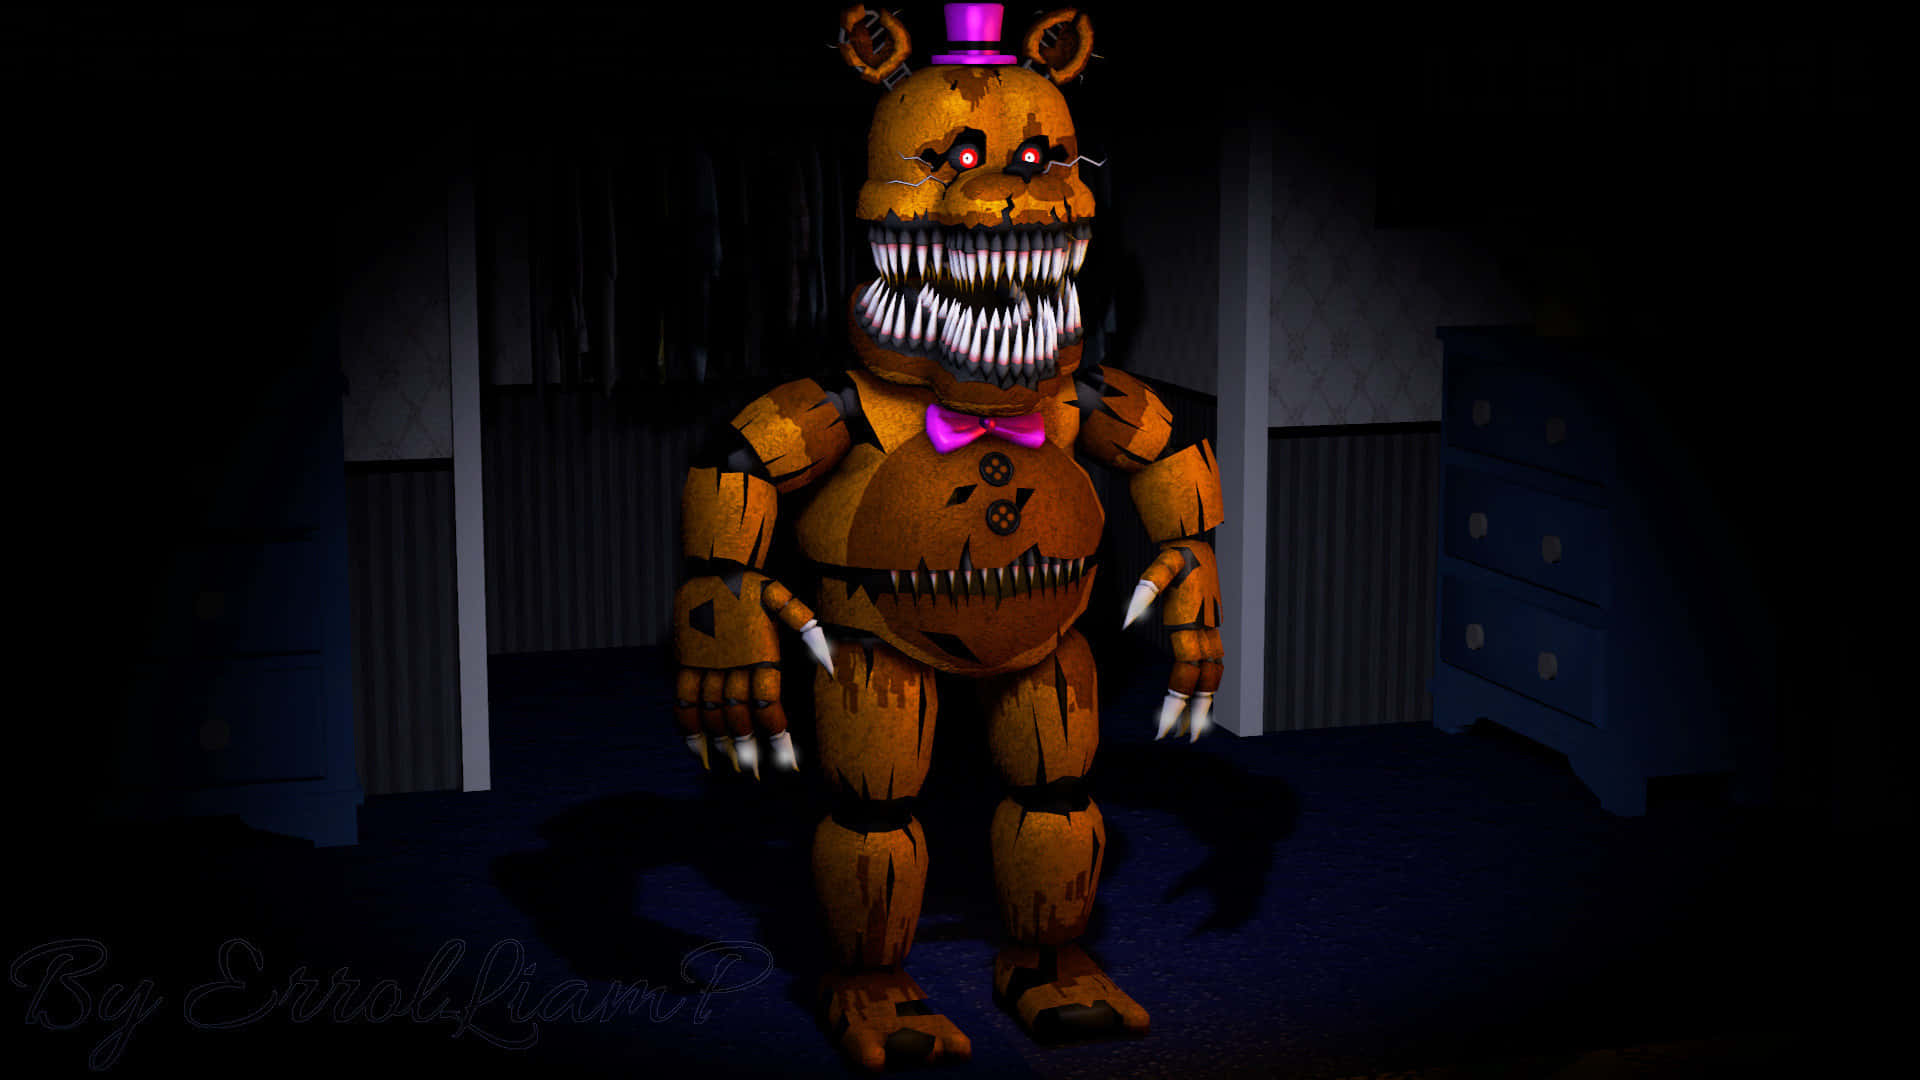 Chilling Display of Fnaf Characters in Action